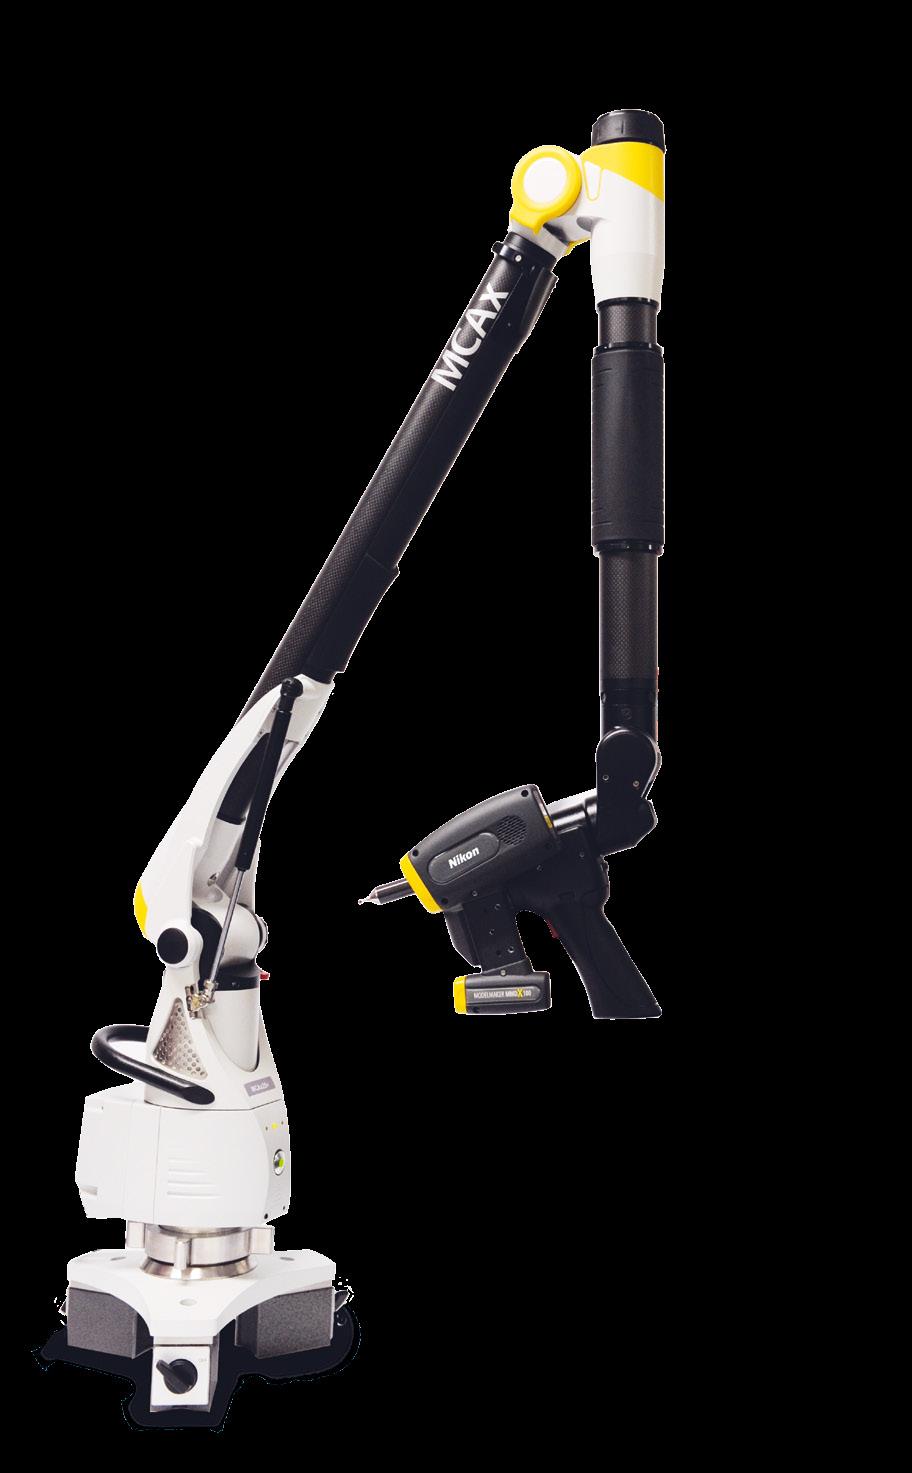 ACCURACY, USABILITY AND PORTABILITY The MCAx Manual Coordinate measuring Arm, is a precise, reliable and easy-to-use portable 7-axis measuring system.